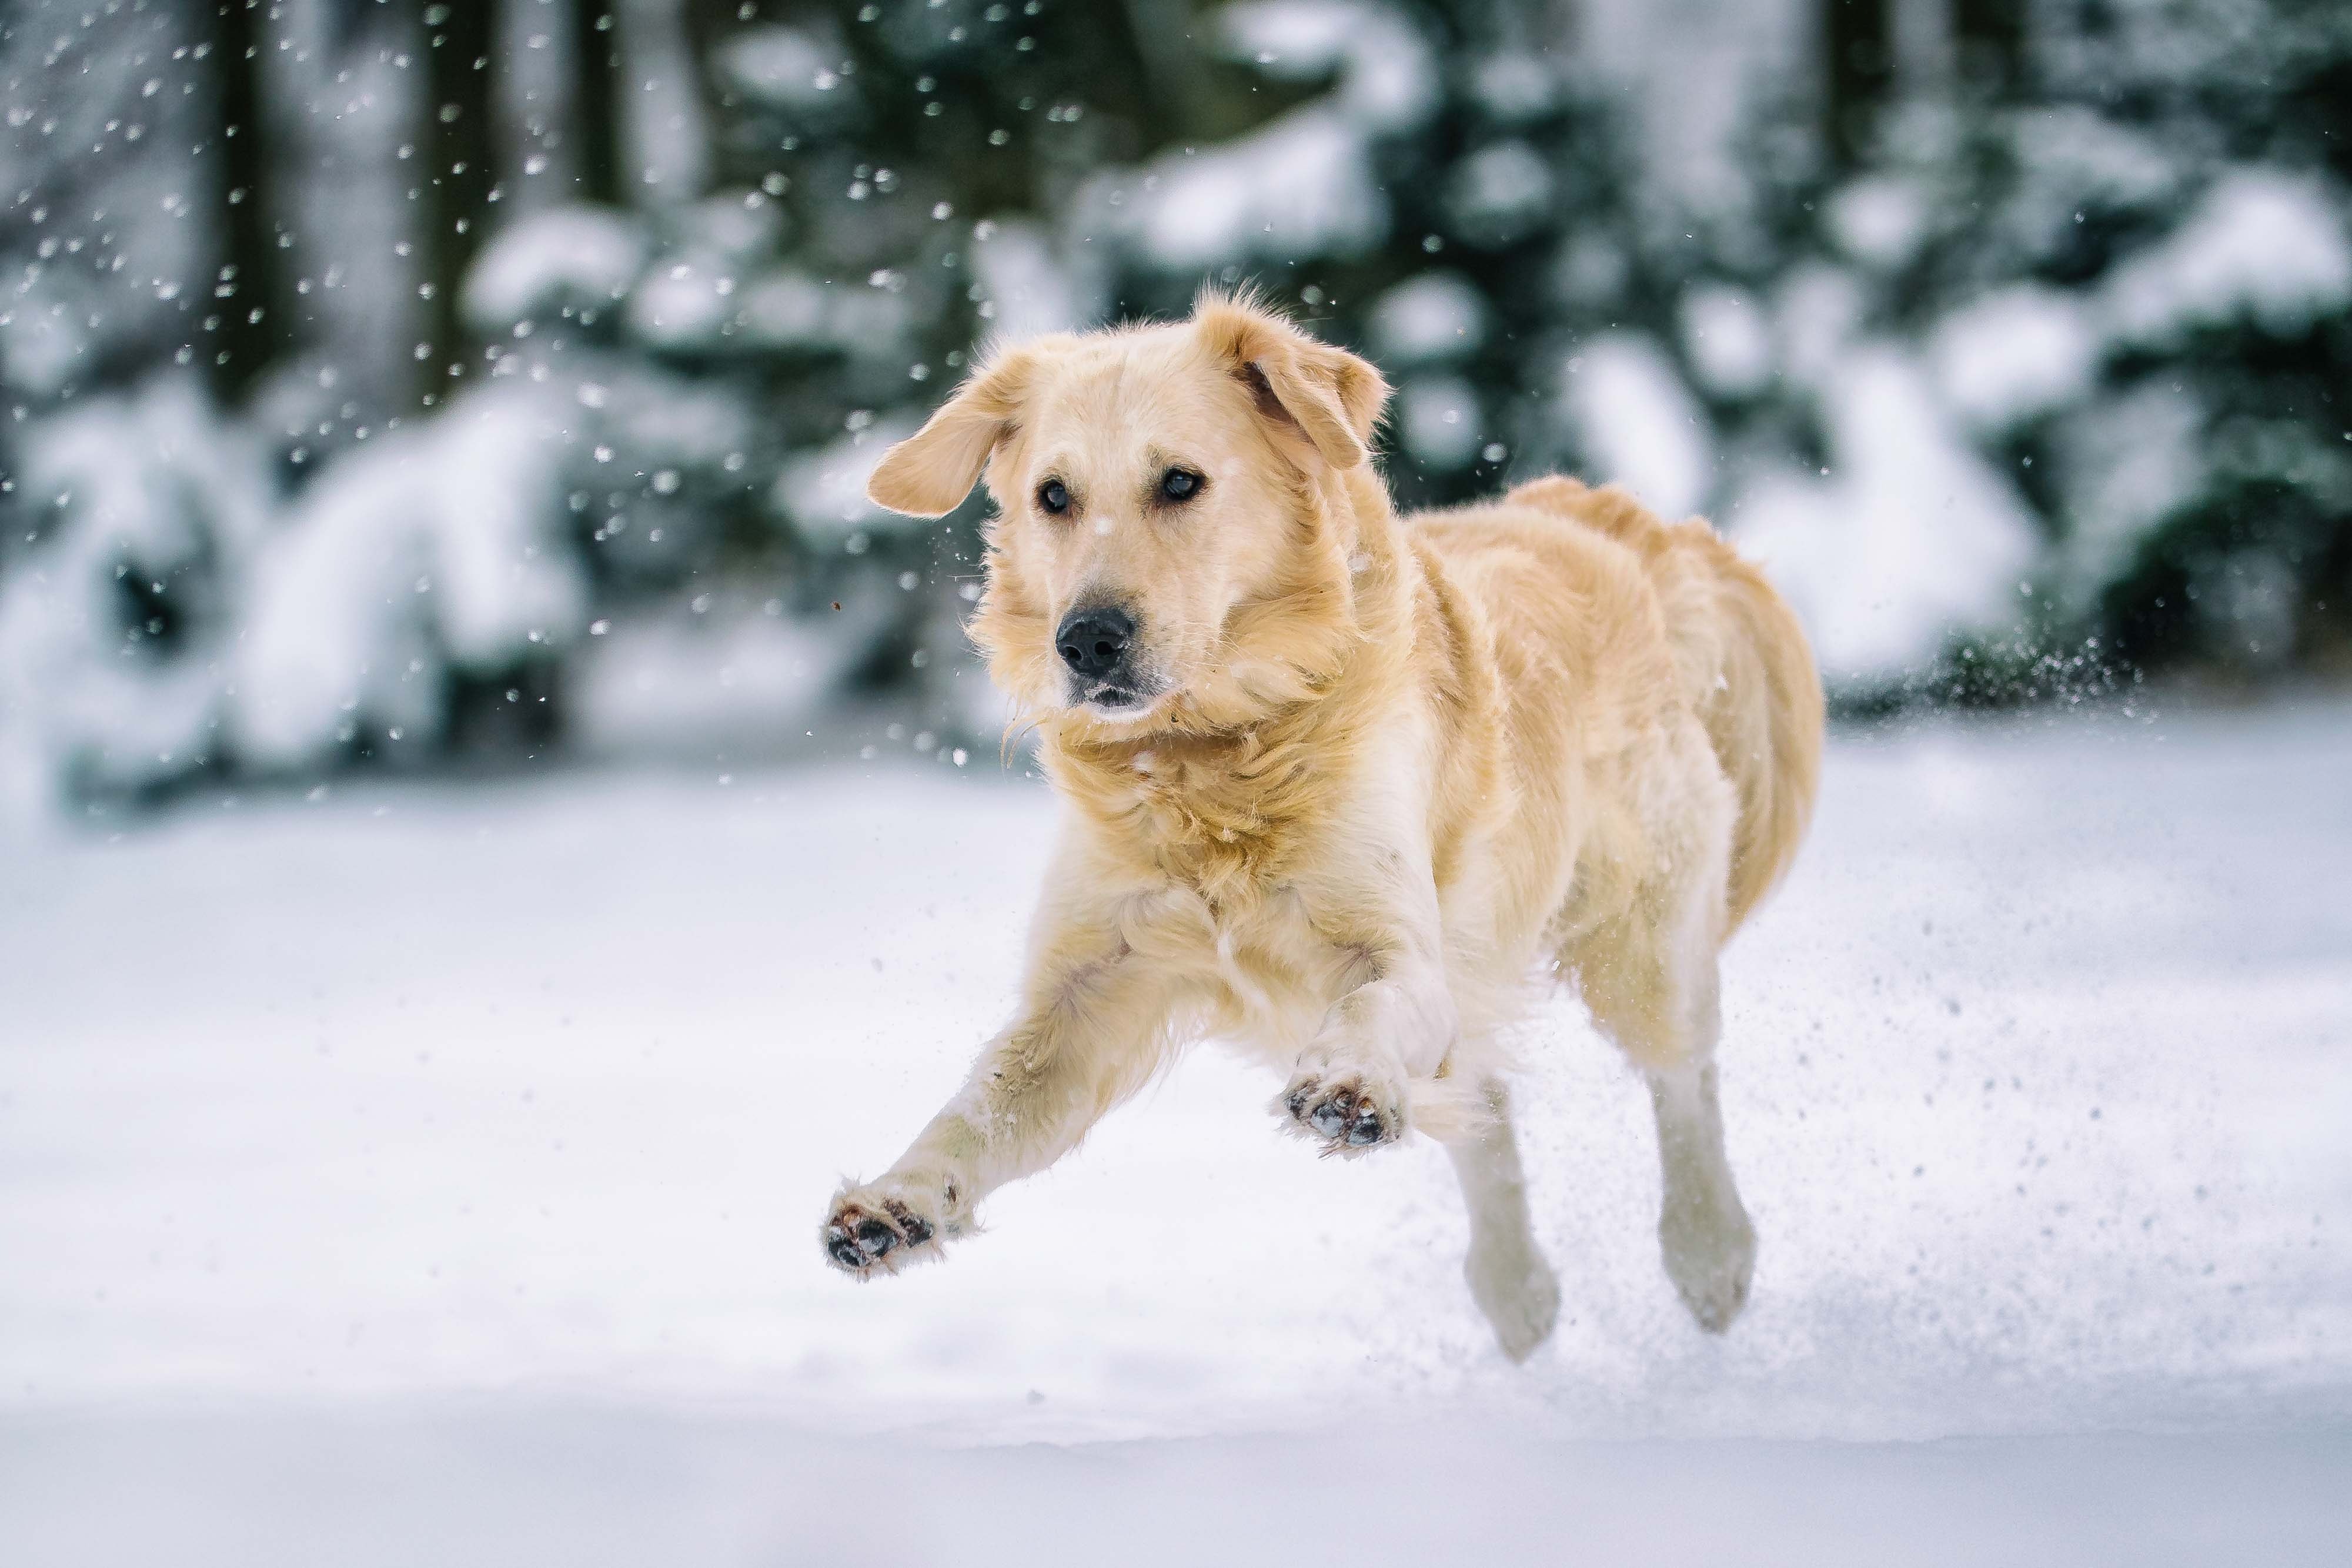 funny dog picture of a golden dog jumping on snow